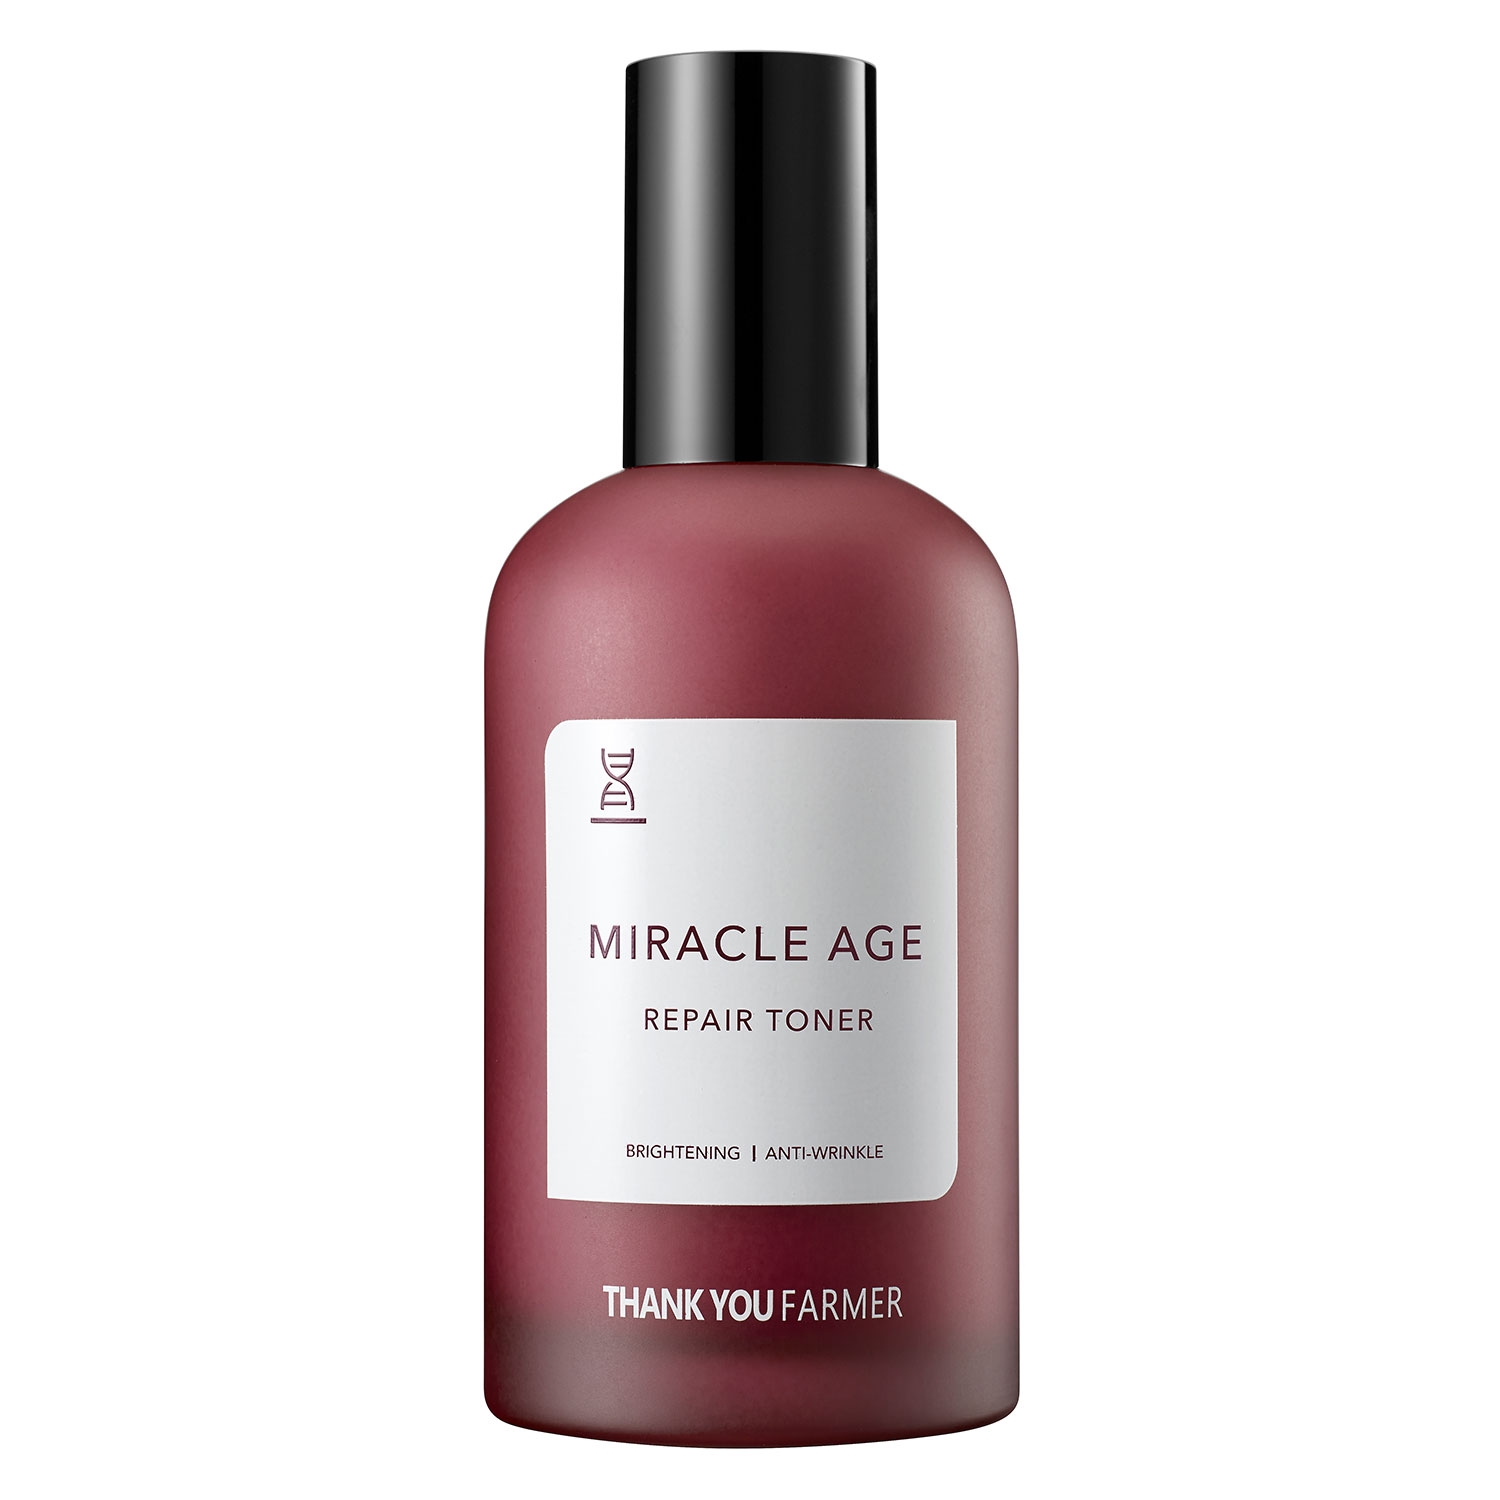 Product image from THANK YOU FARMER - Miracle Age Repair Toner